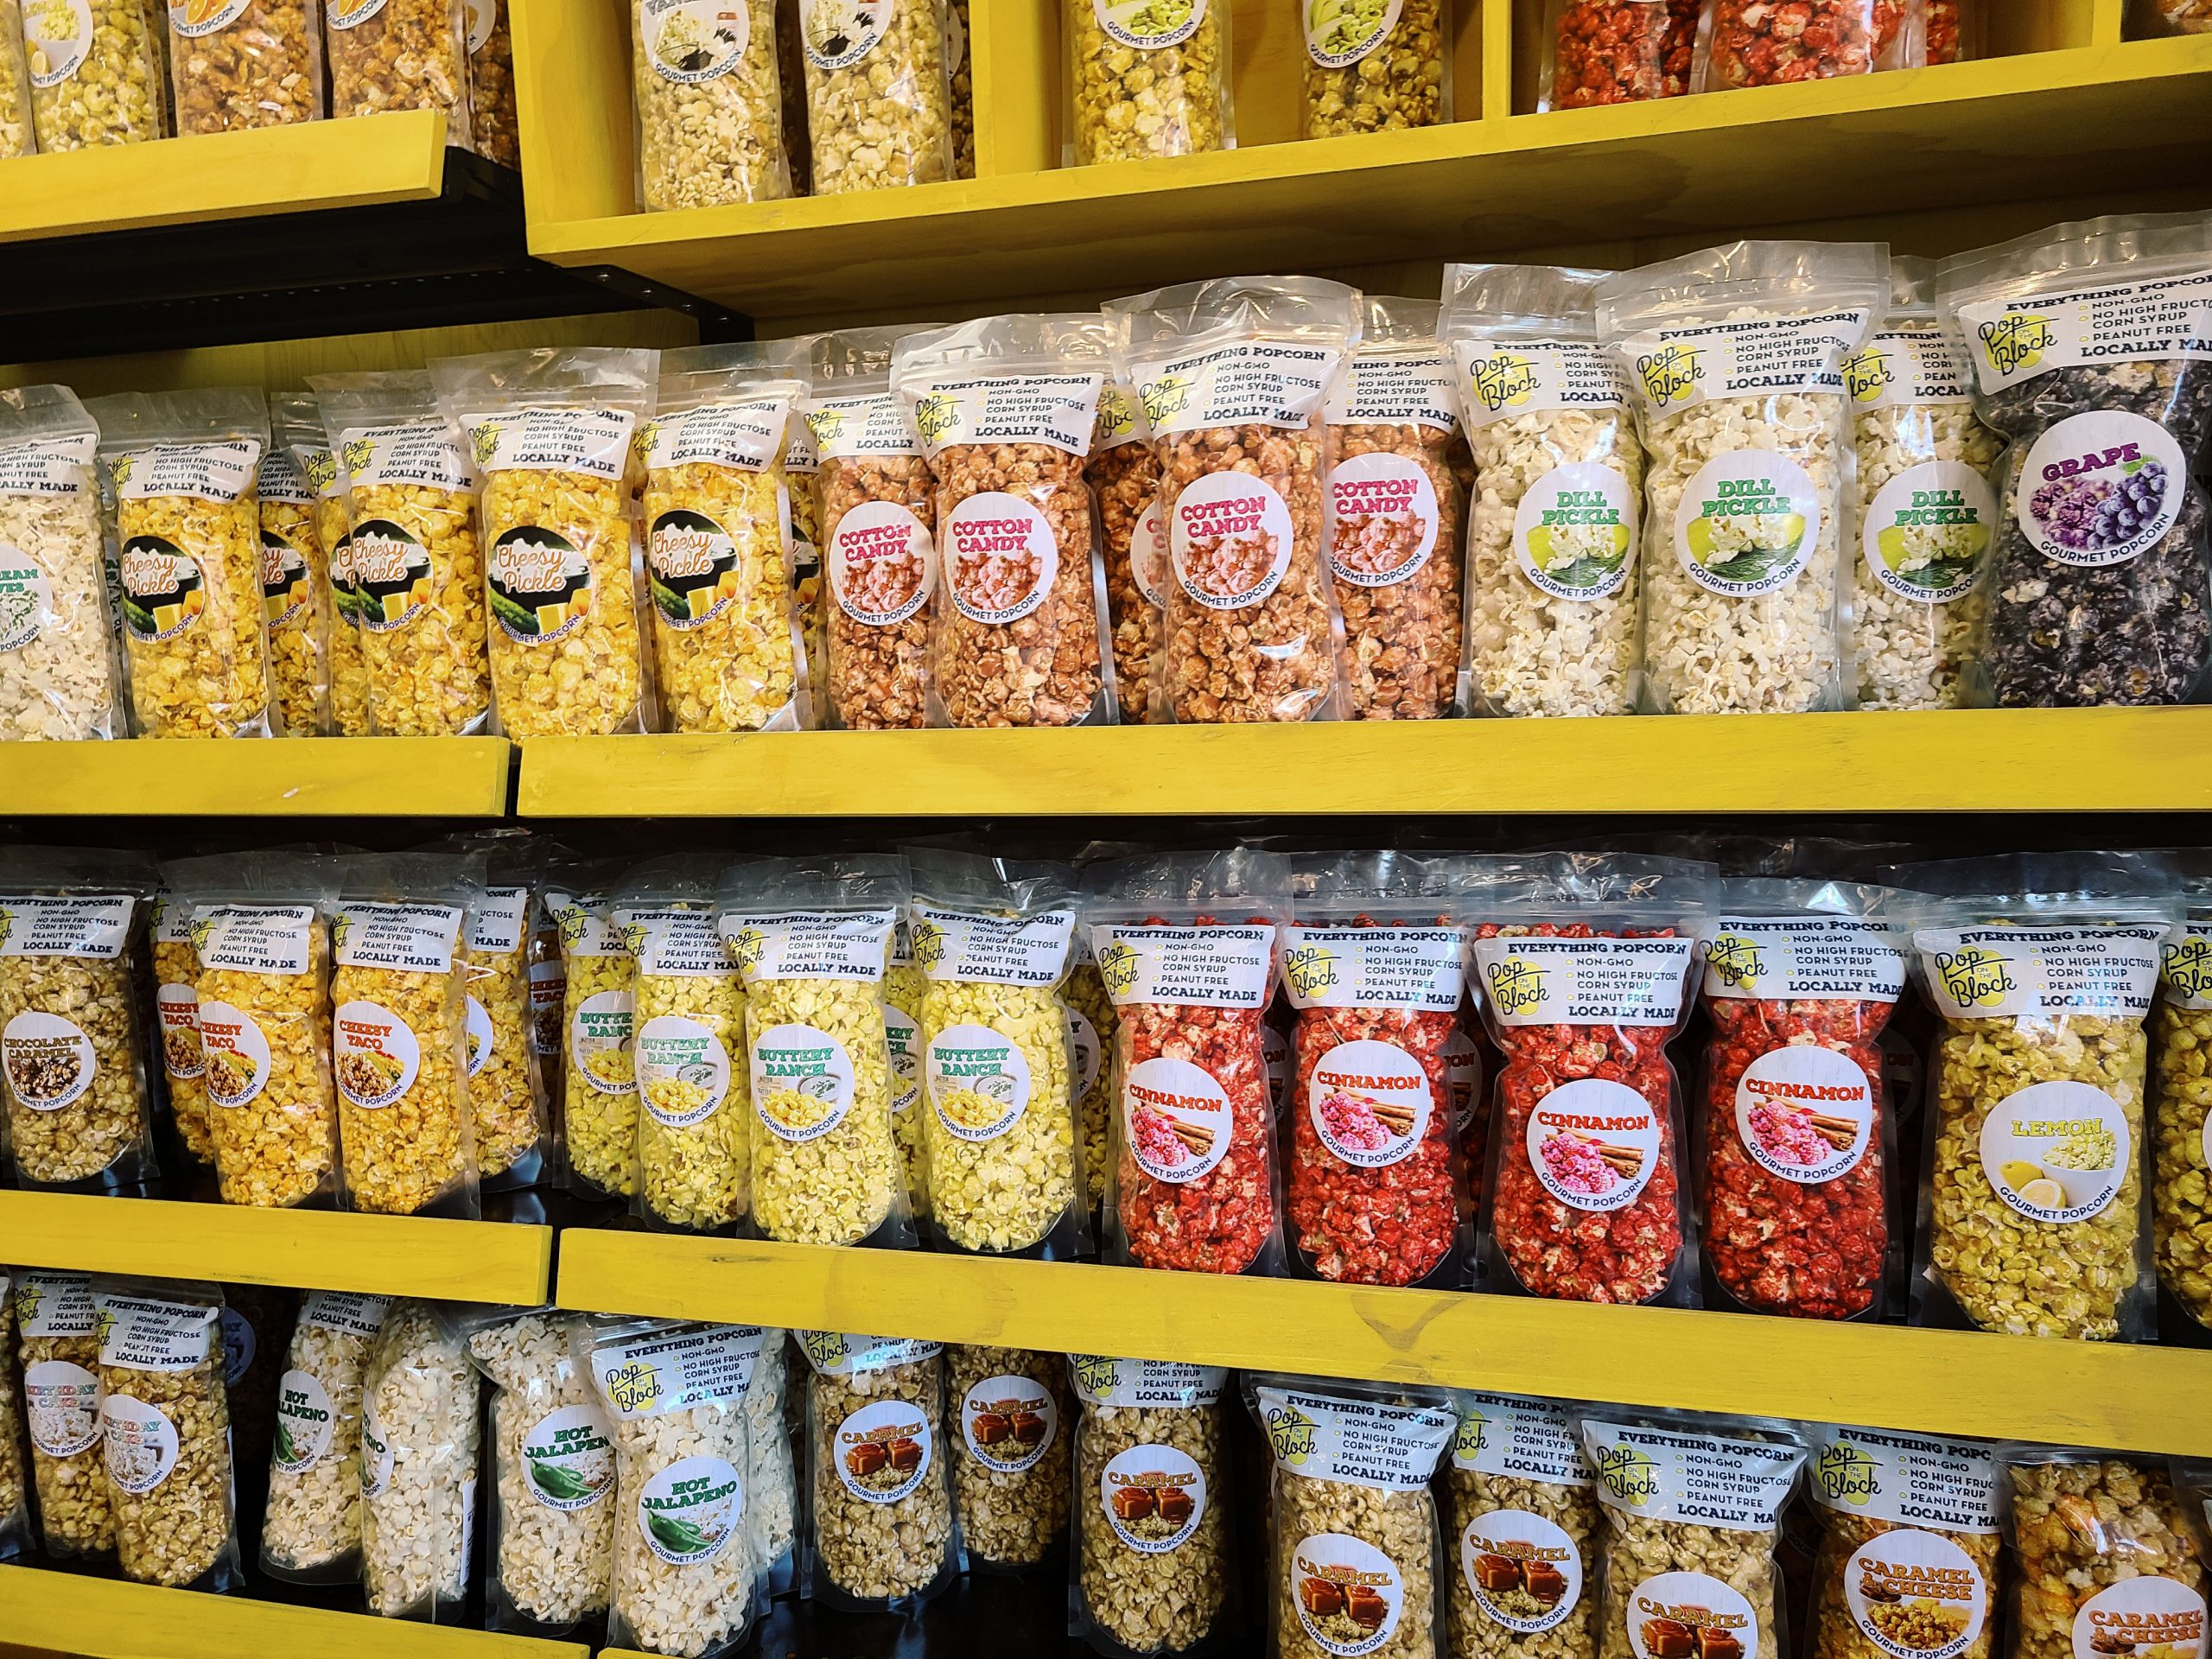 Bags of popcorn in an assortment of creative flavors